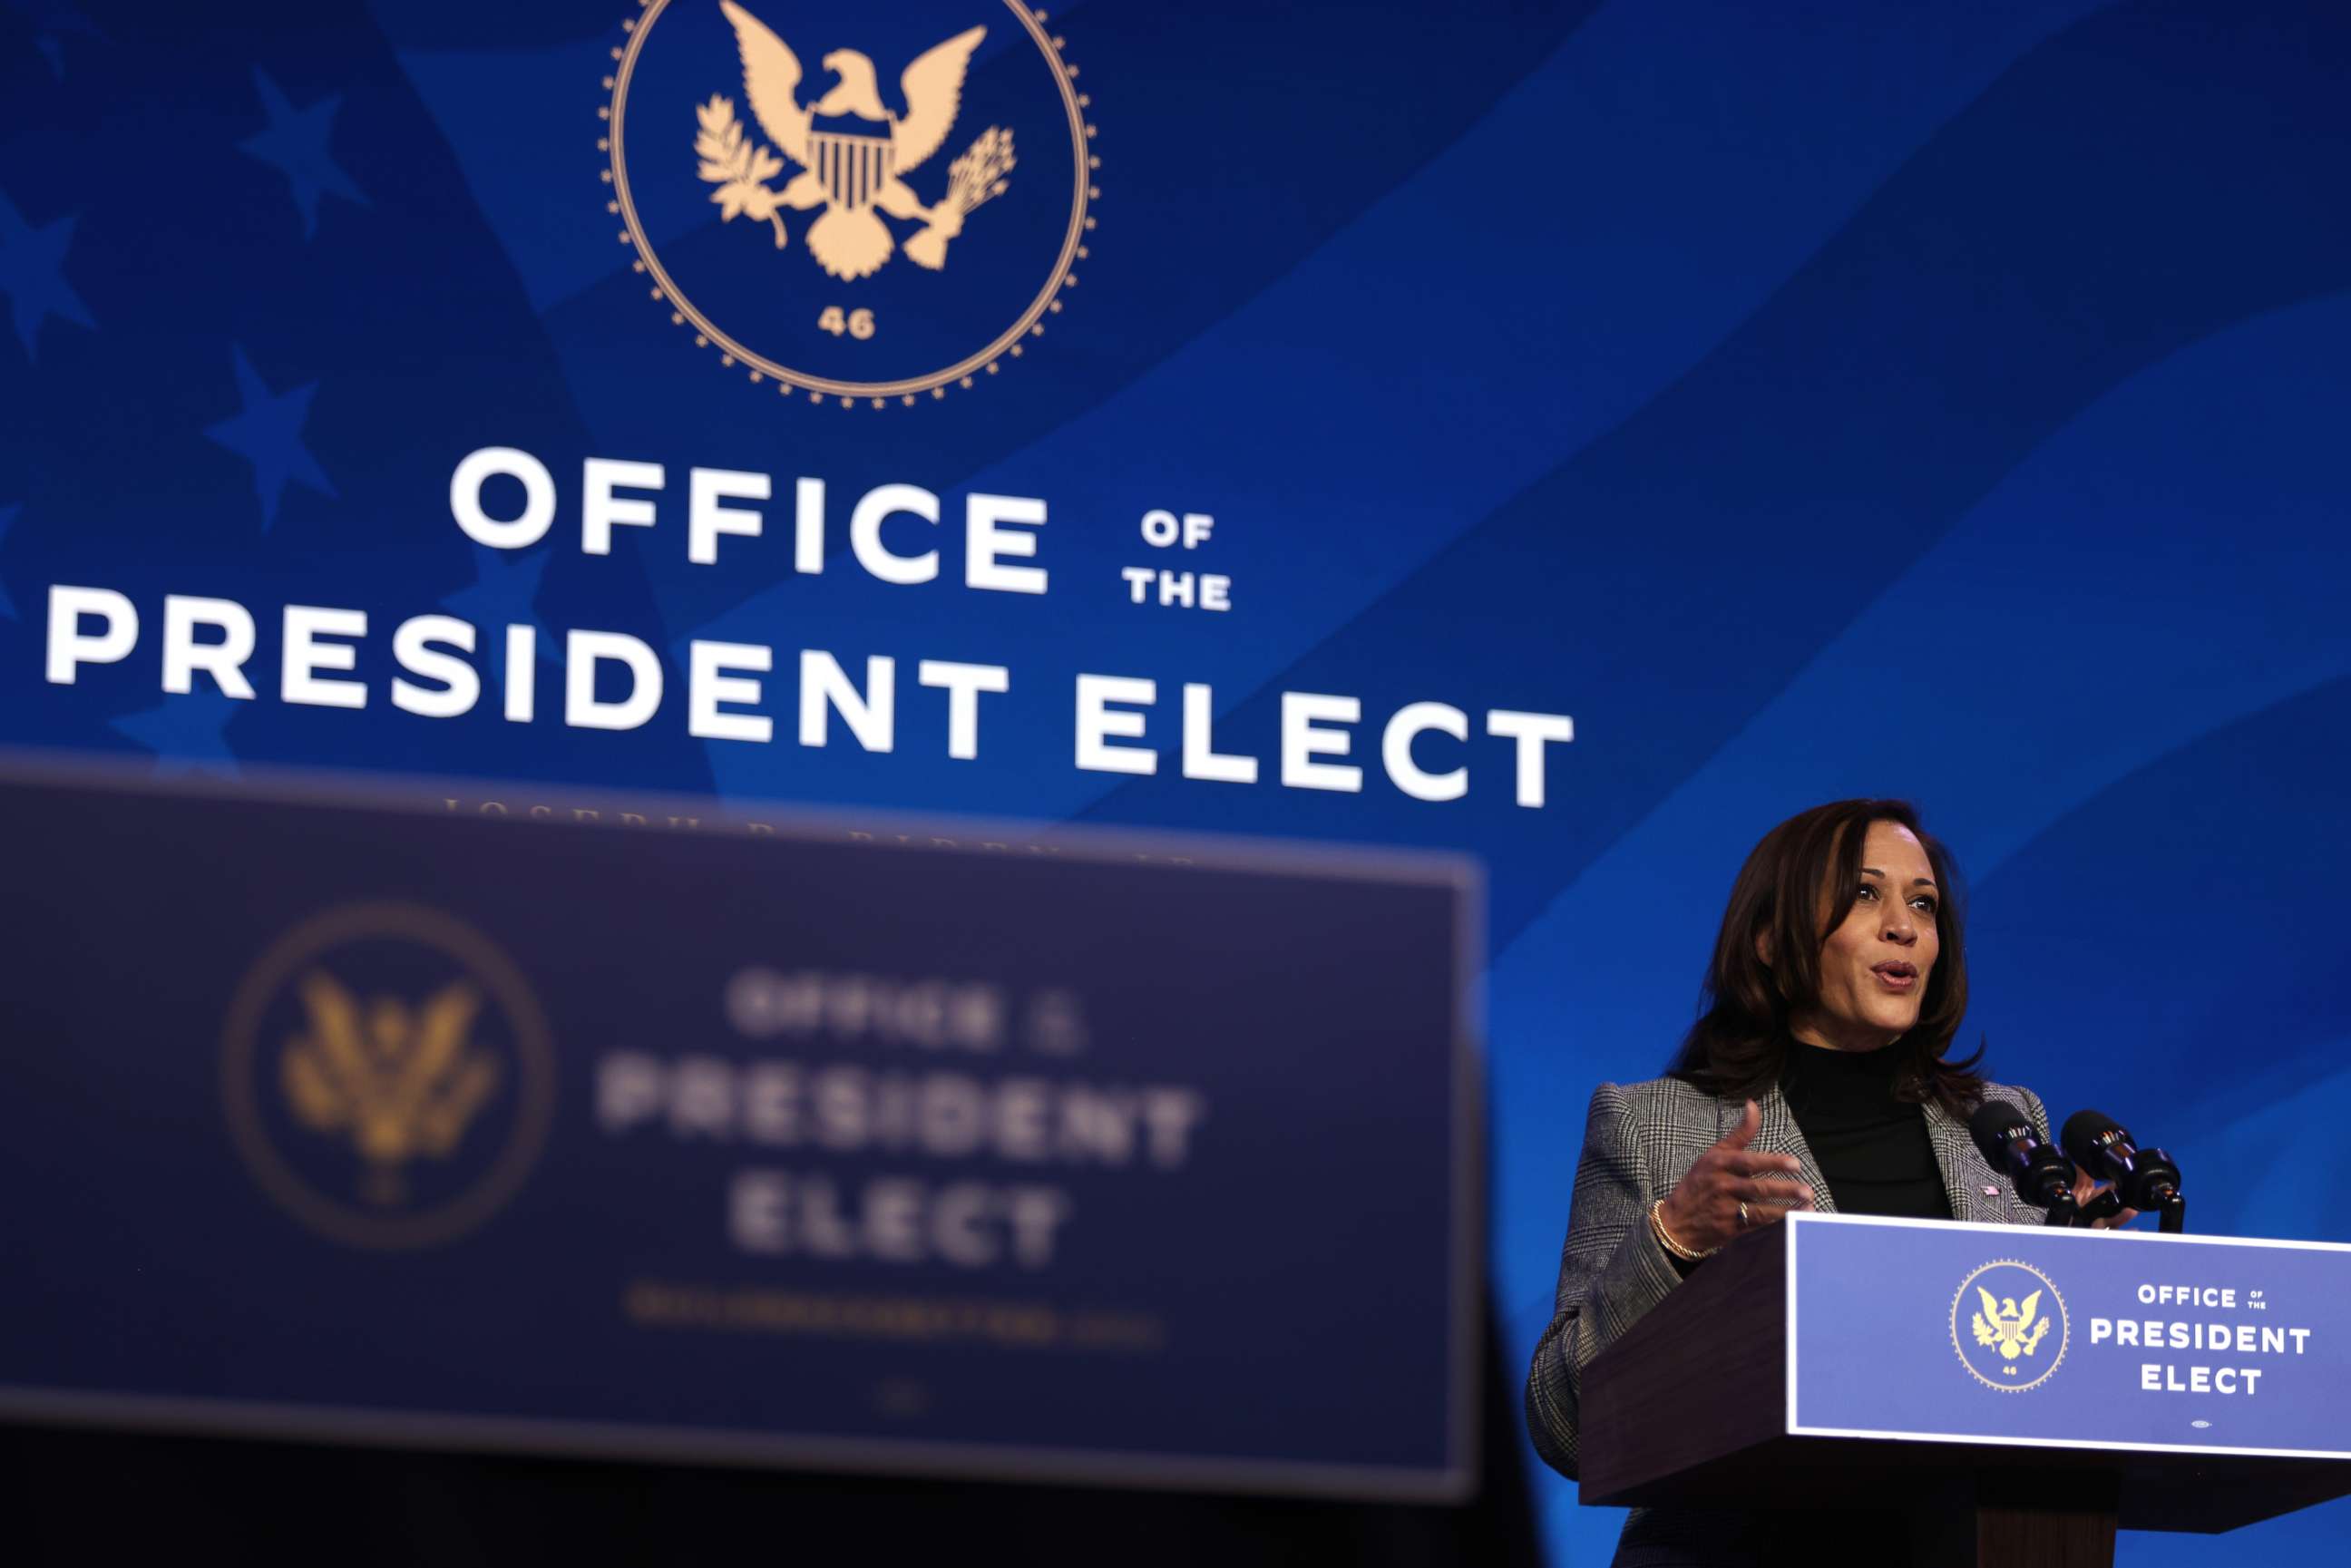 PHOTO: U.S. Vice President-elect Kamala Harris speaks during an announcement January 16, 2021 at the Queen theater in Wilmington, Delaware. President-elect Joe Biden has announced key members of his incoming White House science team.